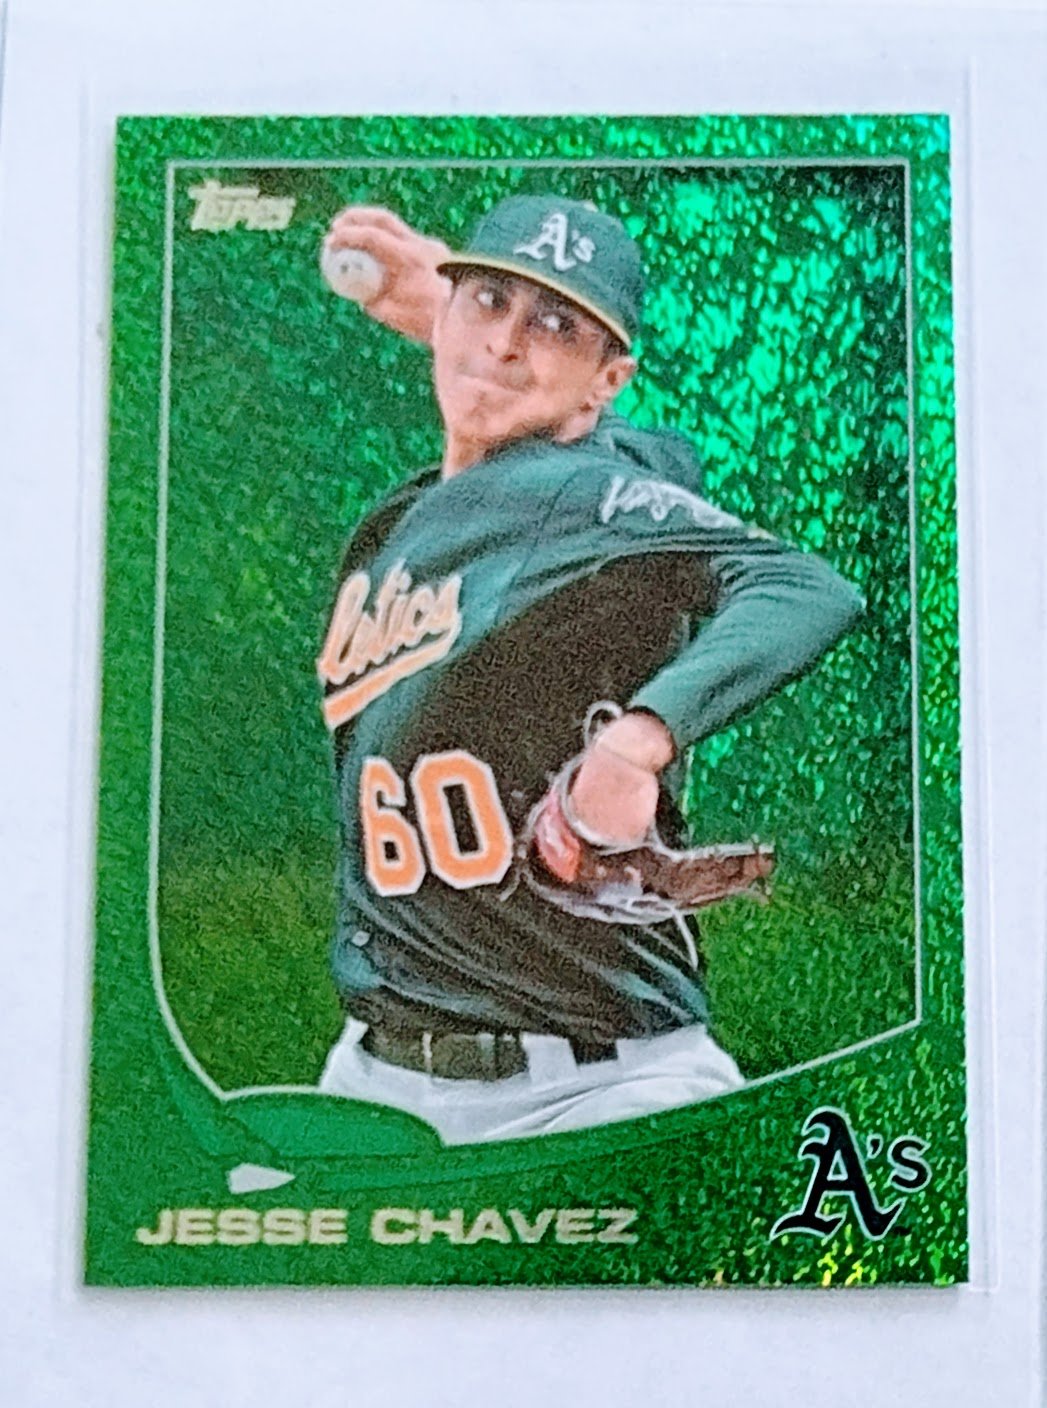 2013 Topps Update Jesse Chavez Green Emerald Baseball Card TPTV simple Xclusive Collectibles   